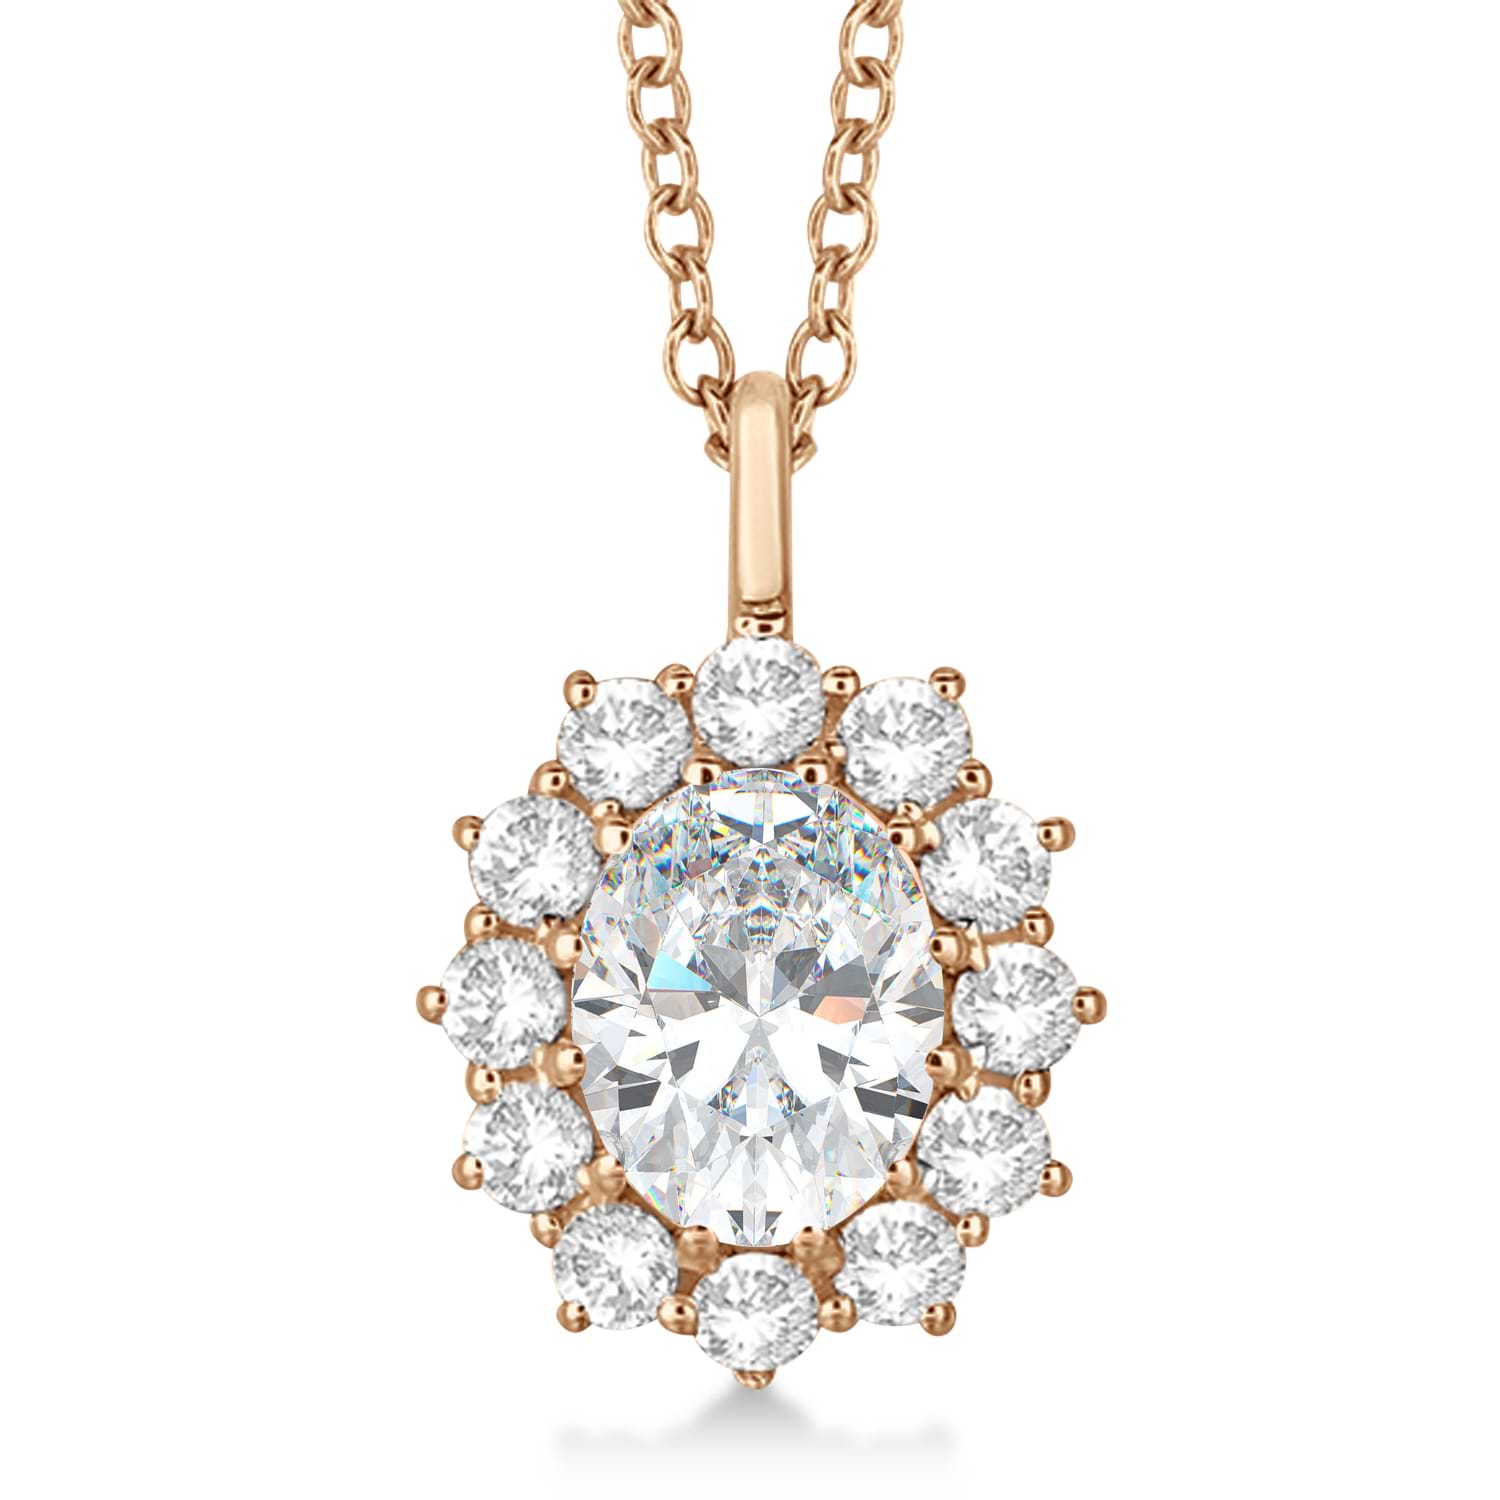 Oval Moissanite and Diamond Pendant Necklace 14k Rose Gold (3.60ctw)